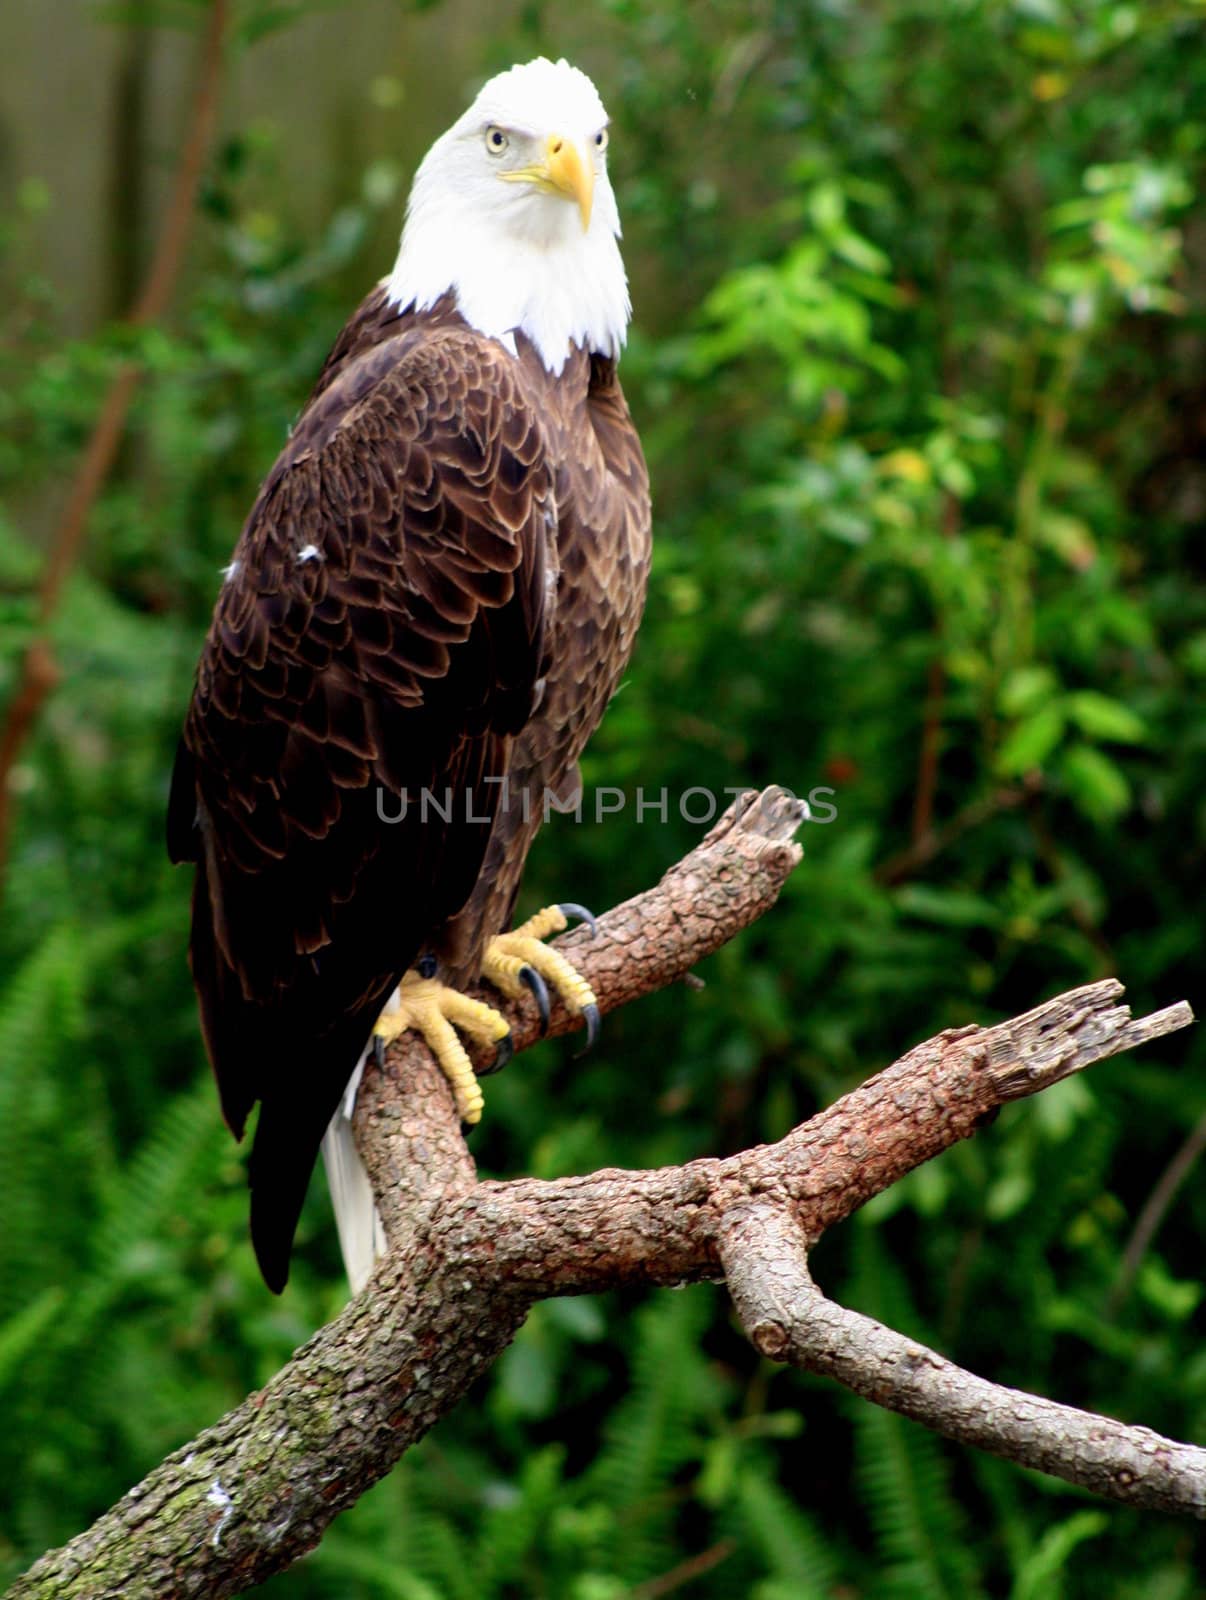 An eagle sitting on a branch